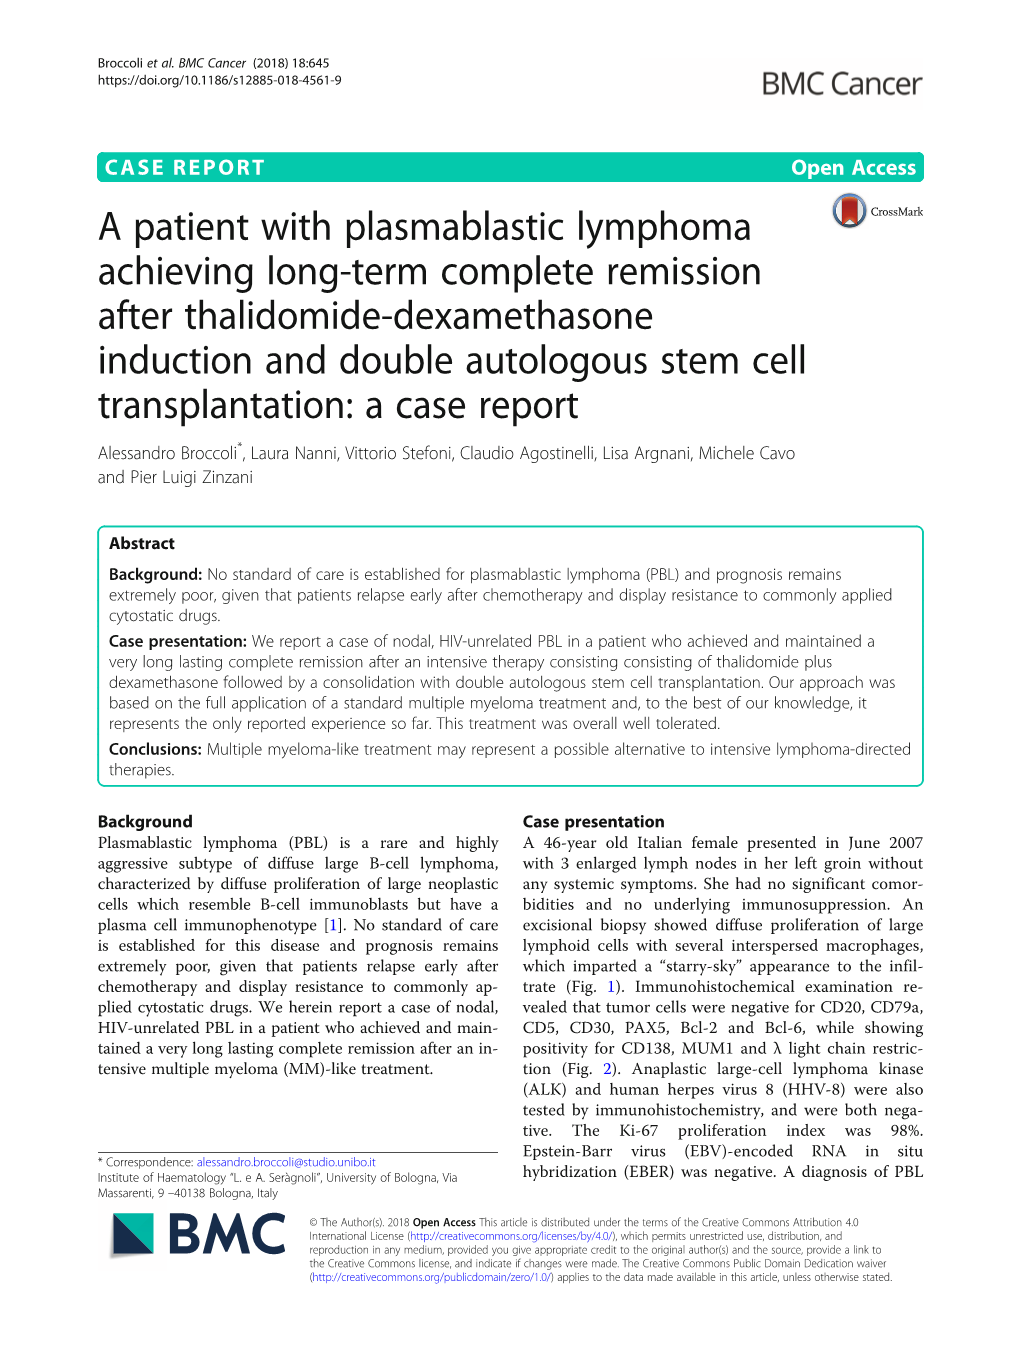 A Patient with Plasmablastic Lymphoma Achieving Long-Term